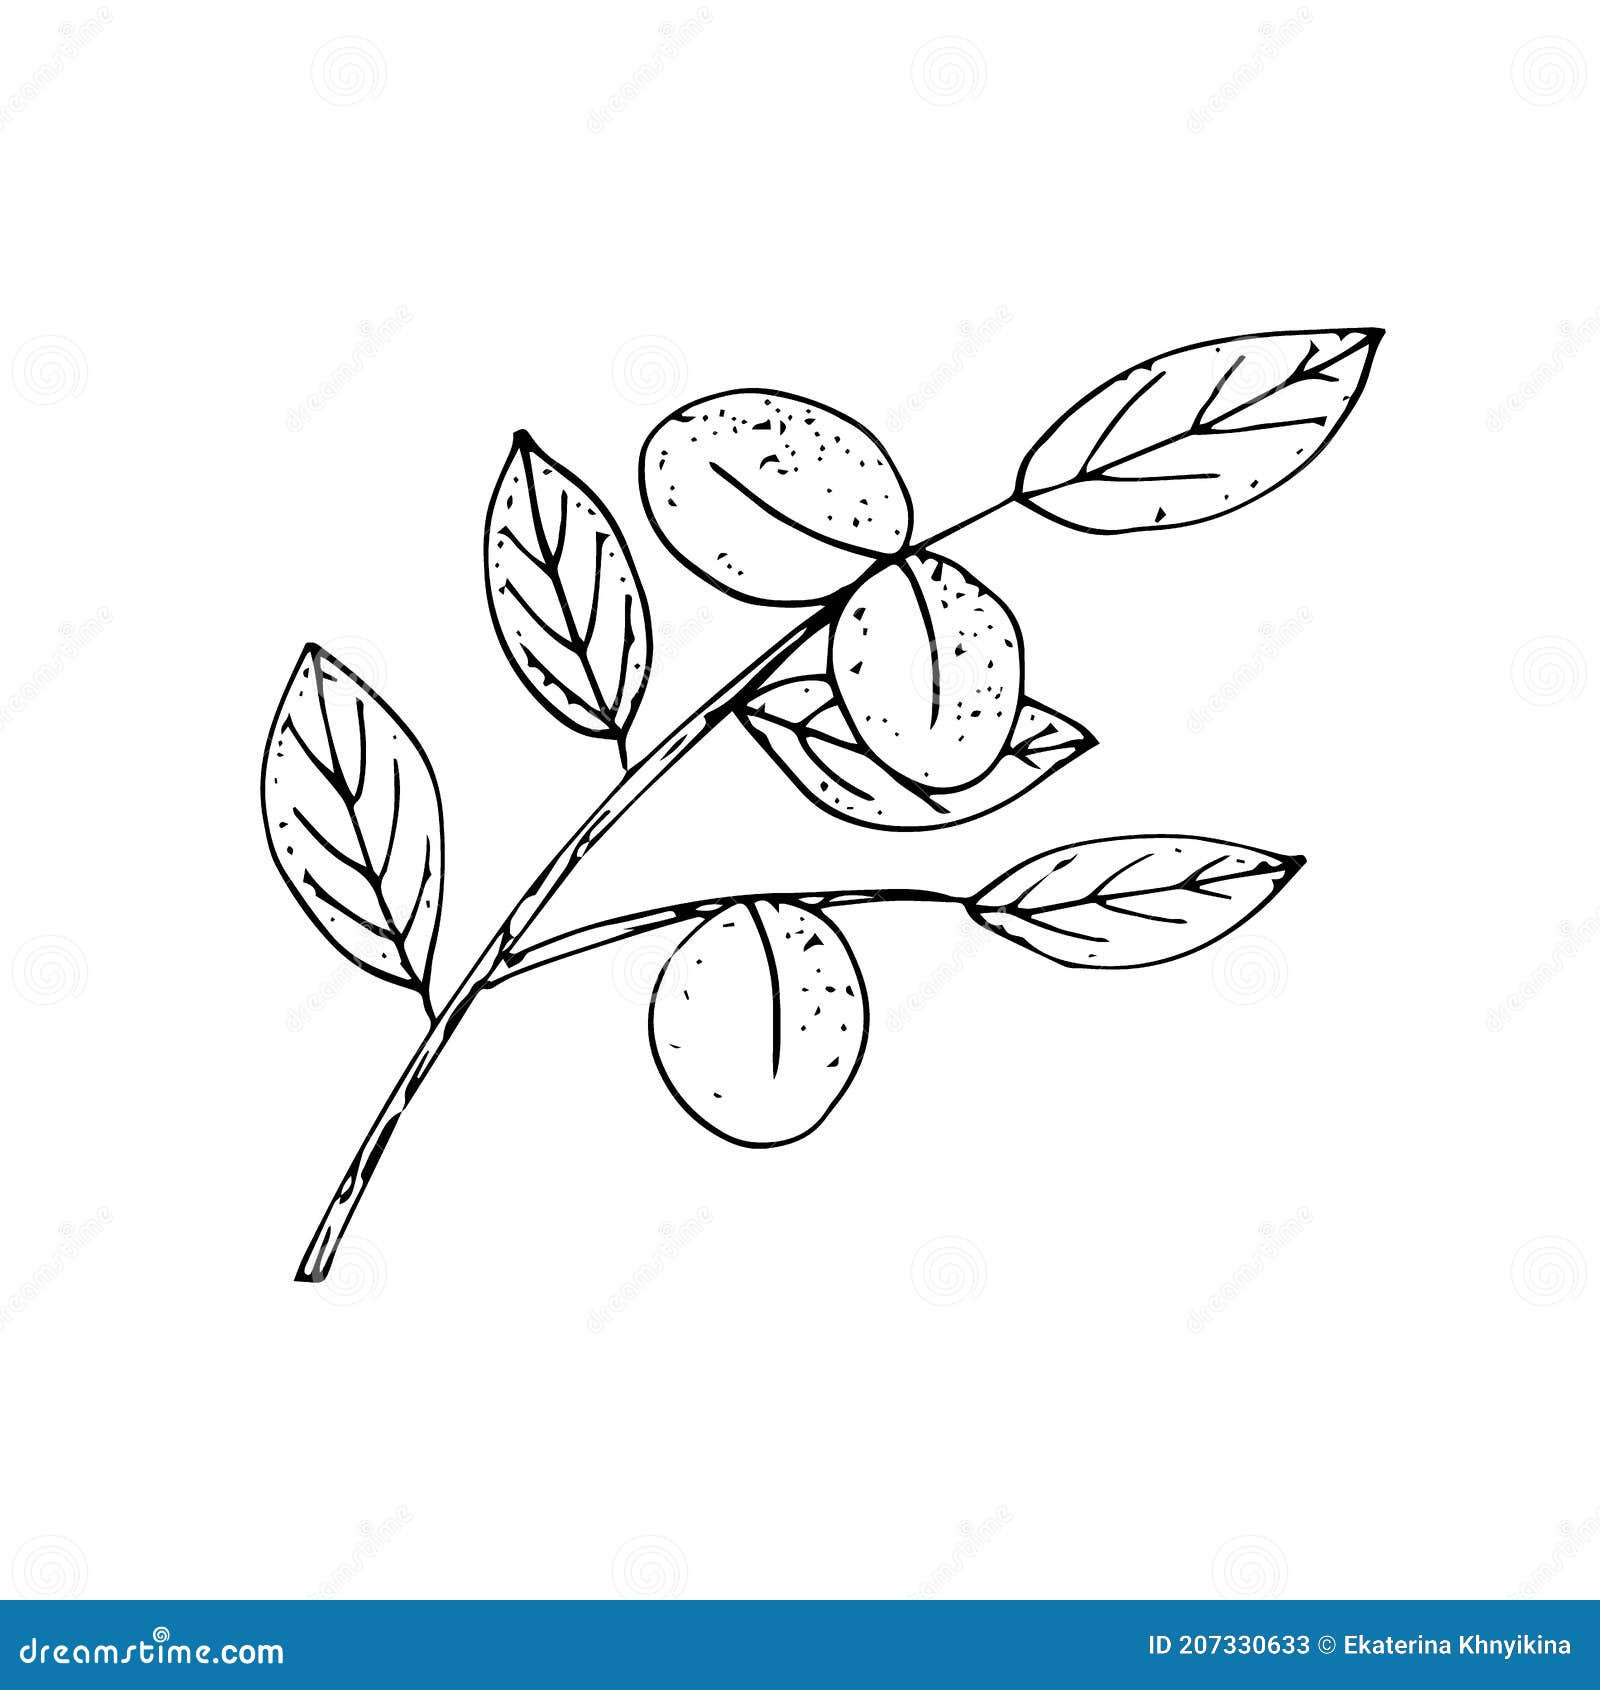 1015695 trees drawing monochrome minimalism grass silhouette branch  flower line sketch twig black and white monochrome photography font   Rare Gallery HD Wallpapers